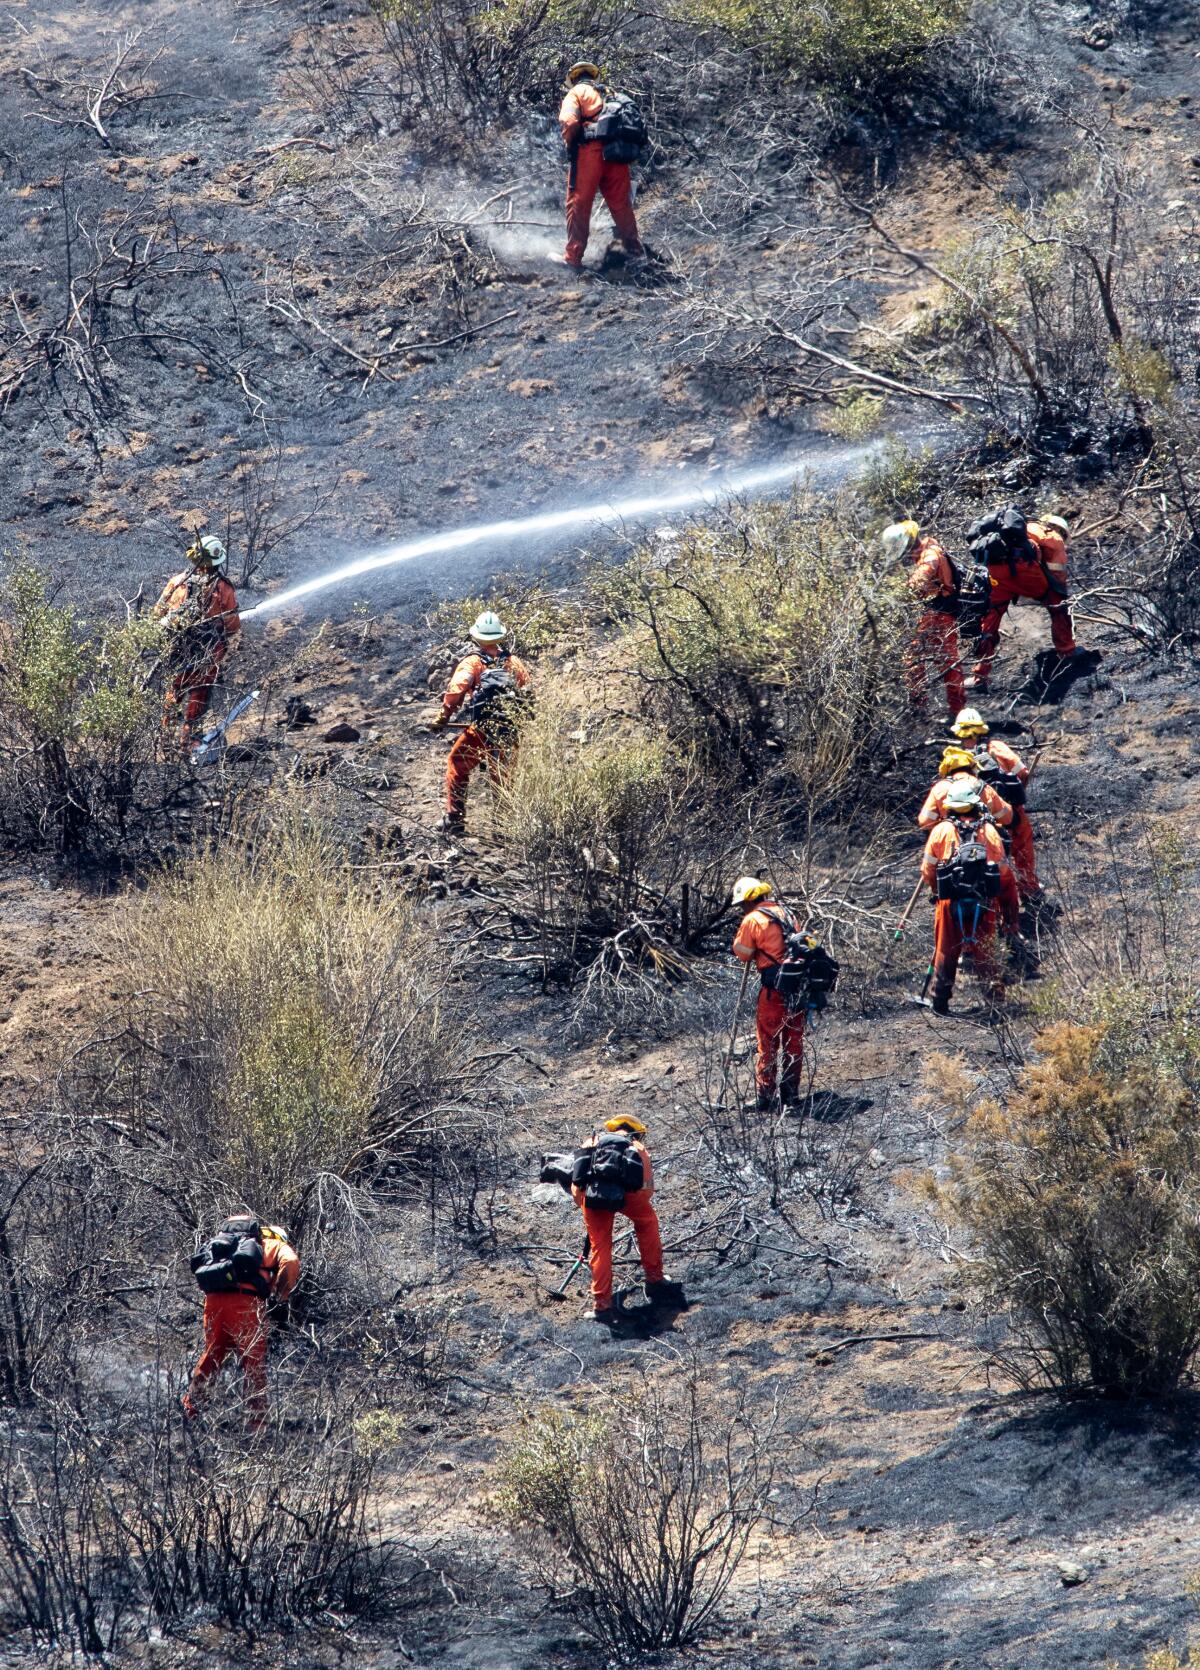 An inmate fire crew mopping up a fire in Agoura Hills